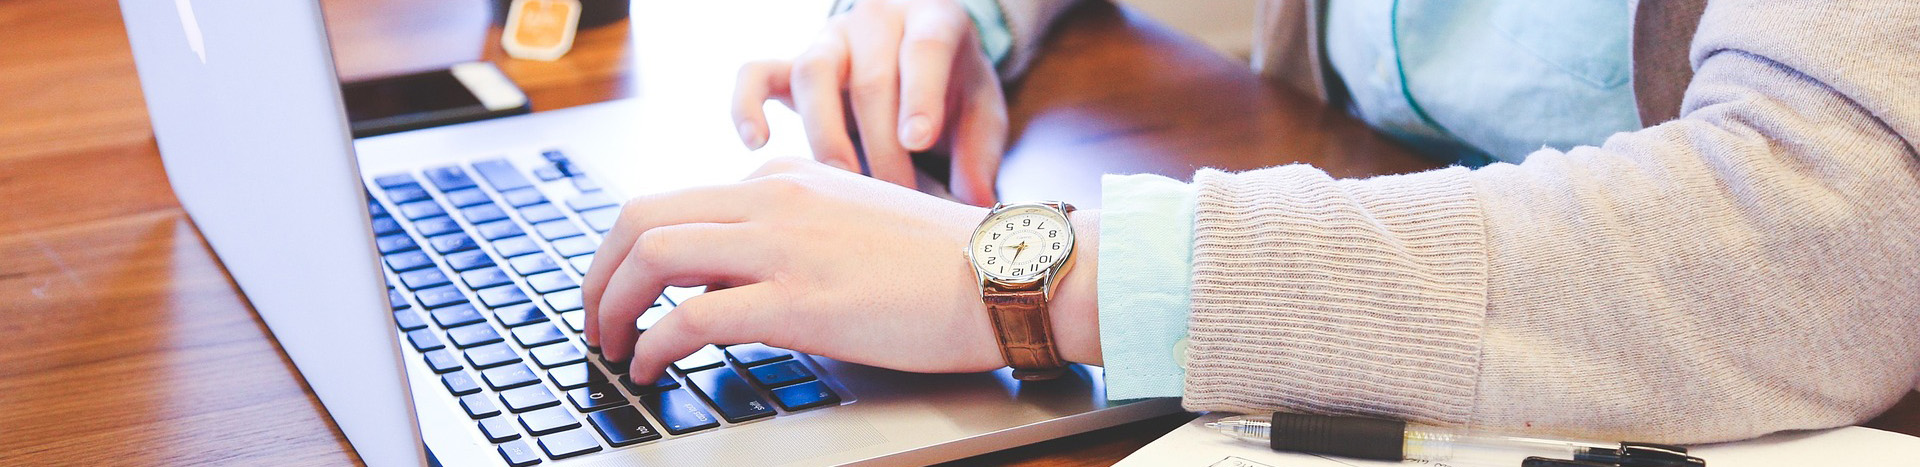 Hands typing on a laptop. Person wearing analog watch.